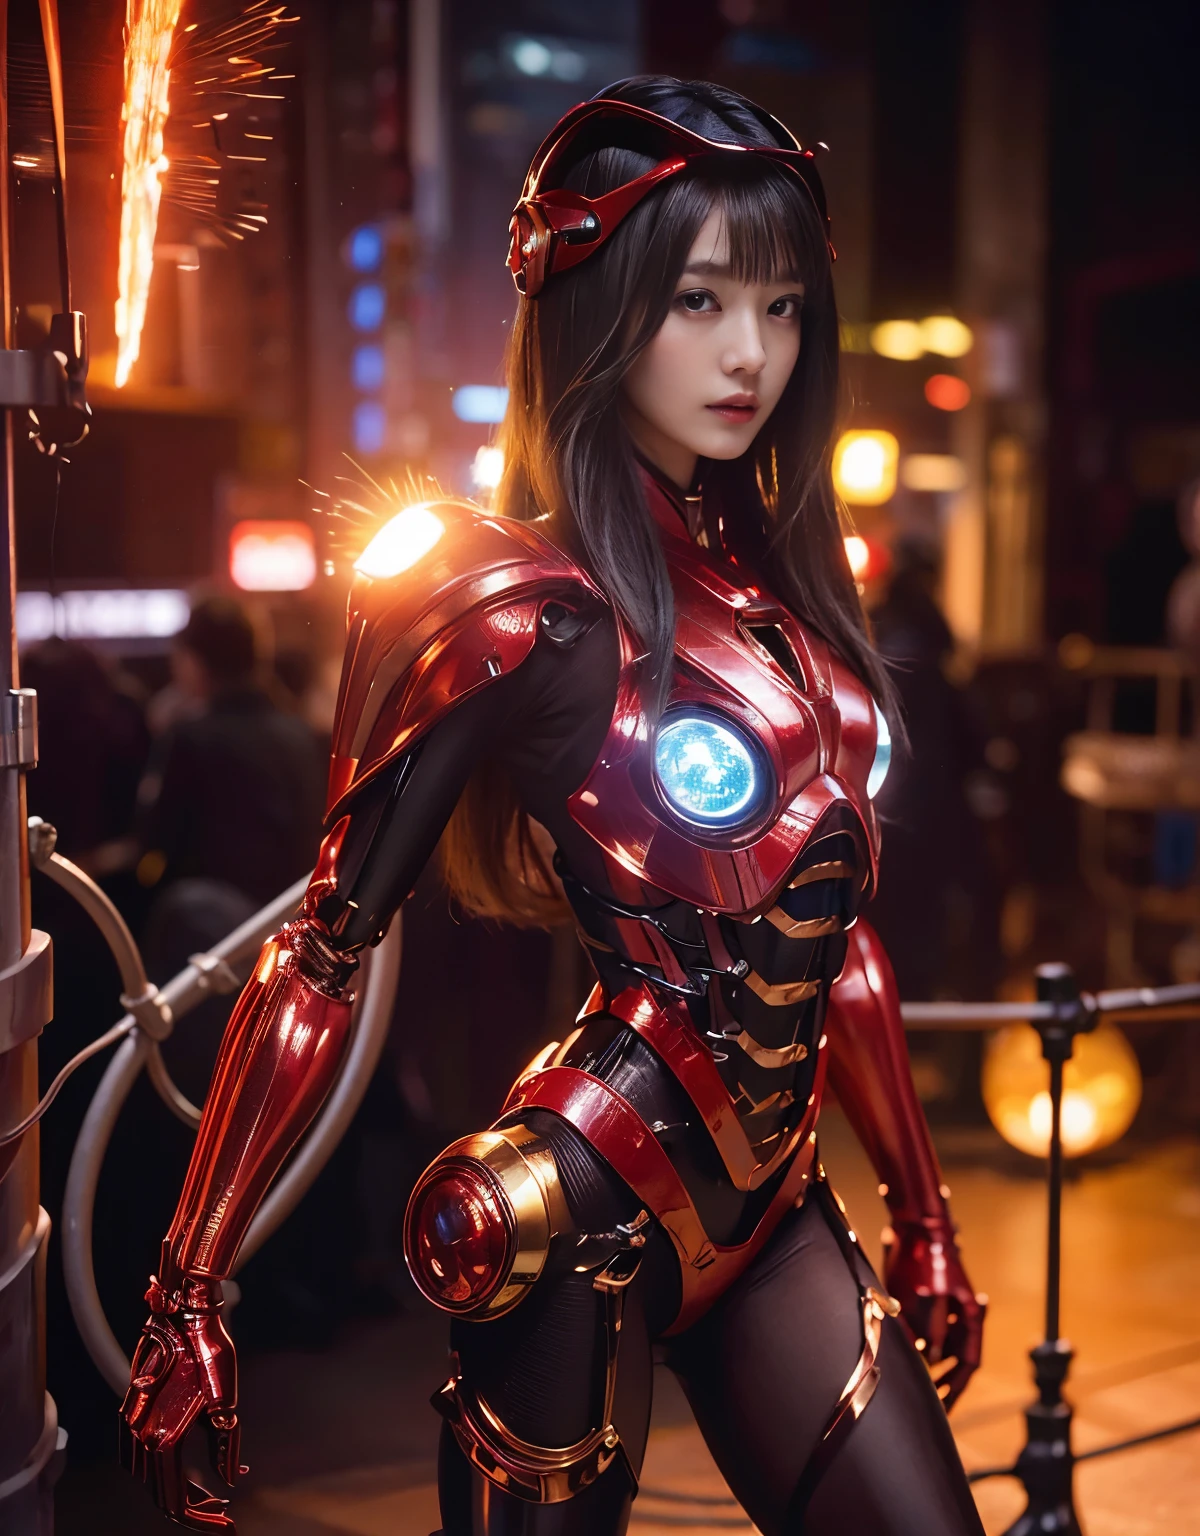 (Skimpy mechanical girl and alien background)、（Mystical expression）、top-quality、​masterpiece、超A high resolution、(Photorealsitic:1.4)、Raw photo、1 girl、glowy skin、(((1 Mechanical Girl)))、（red metalボディスーツ）、(Natural alien background to fight aliens)、(Small LED)、((super realistic details))、vertical giant monster background),globalillumination、Shadow、octan render、8k、ultrasharp、equipment people background、Colossal 、Raw skin exposed in the cleavage、red metal、Details of complex ornaments、Japan details、highly intricate detail、Realistic light、(Mystical expression),CG Society Trenlow Eyes、Eyes shining towards the camera、Mechanical marginal blood vessels connected to neon detail tubes)、(Wires and cables connecting to the head)、Small LED、,Mechanical thighs、Toostock、（Hands are also made of machines）、、future alien、Please wear a mechanical helmet、